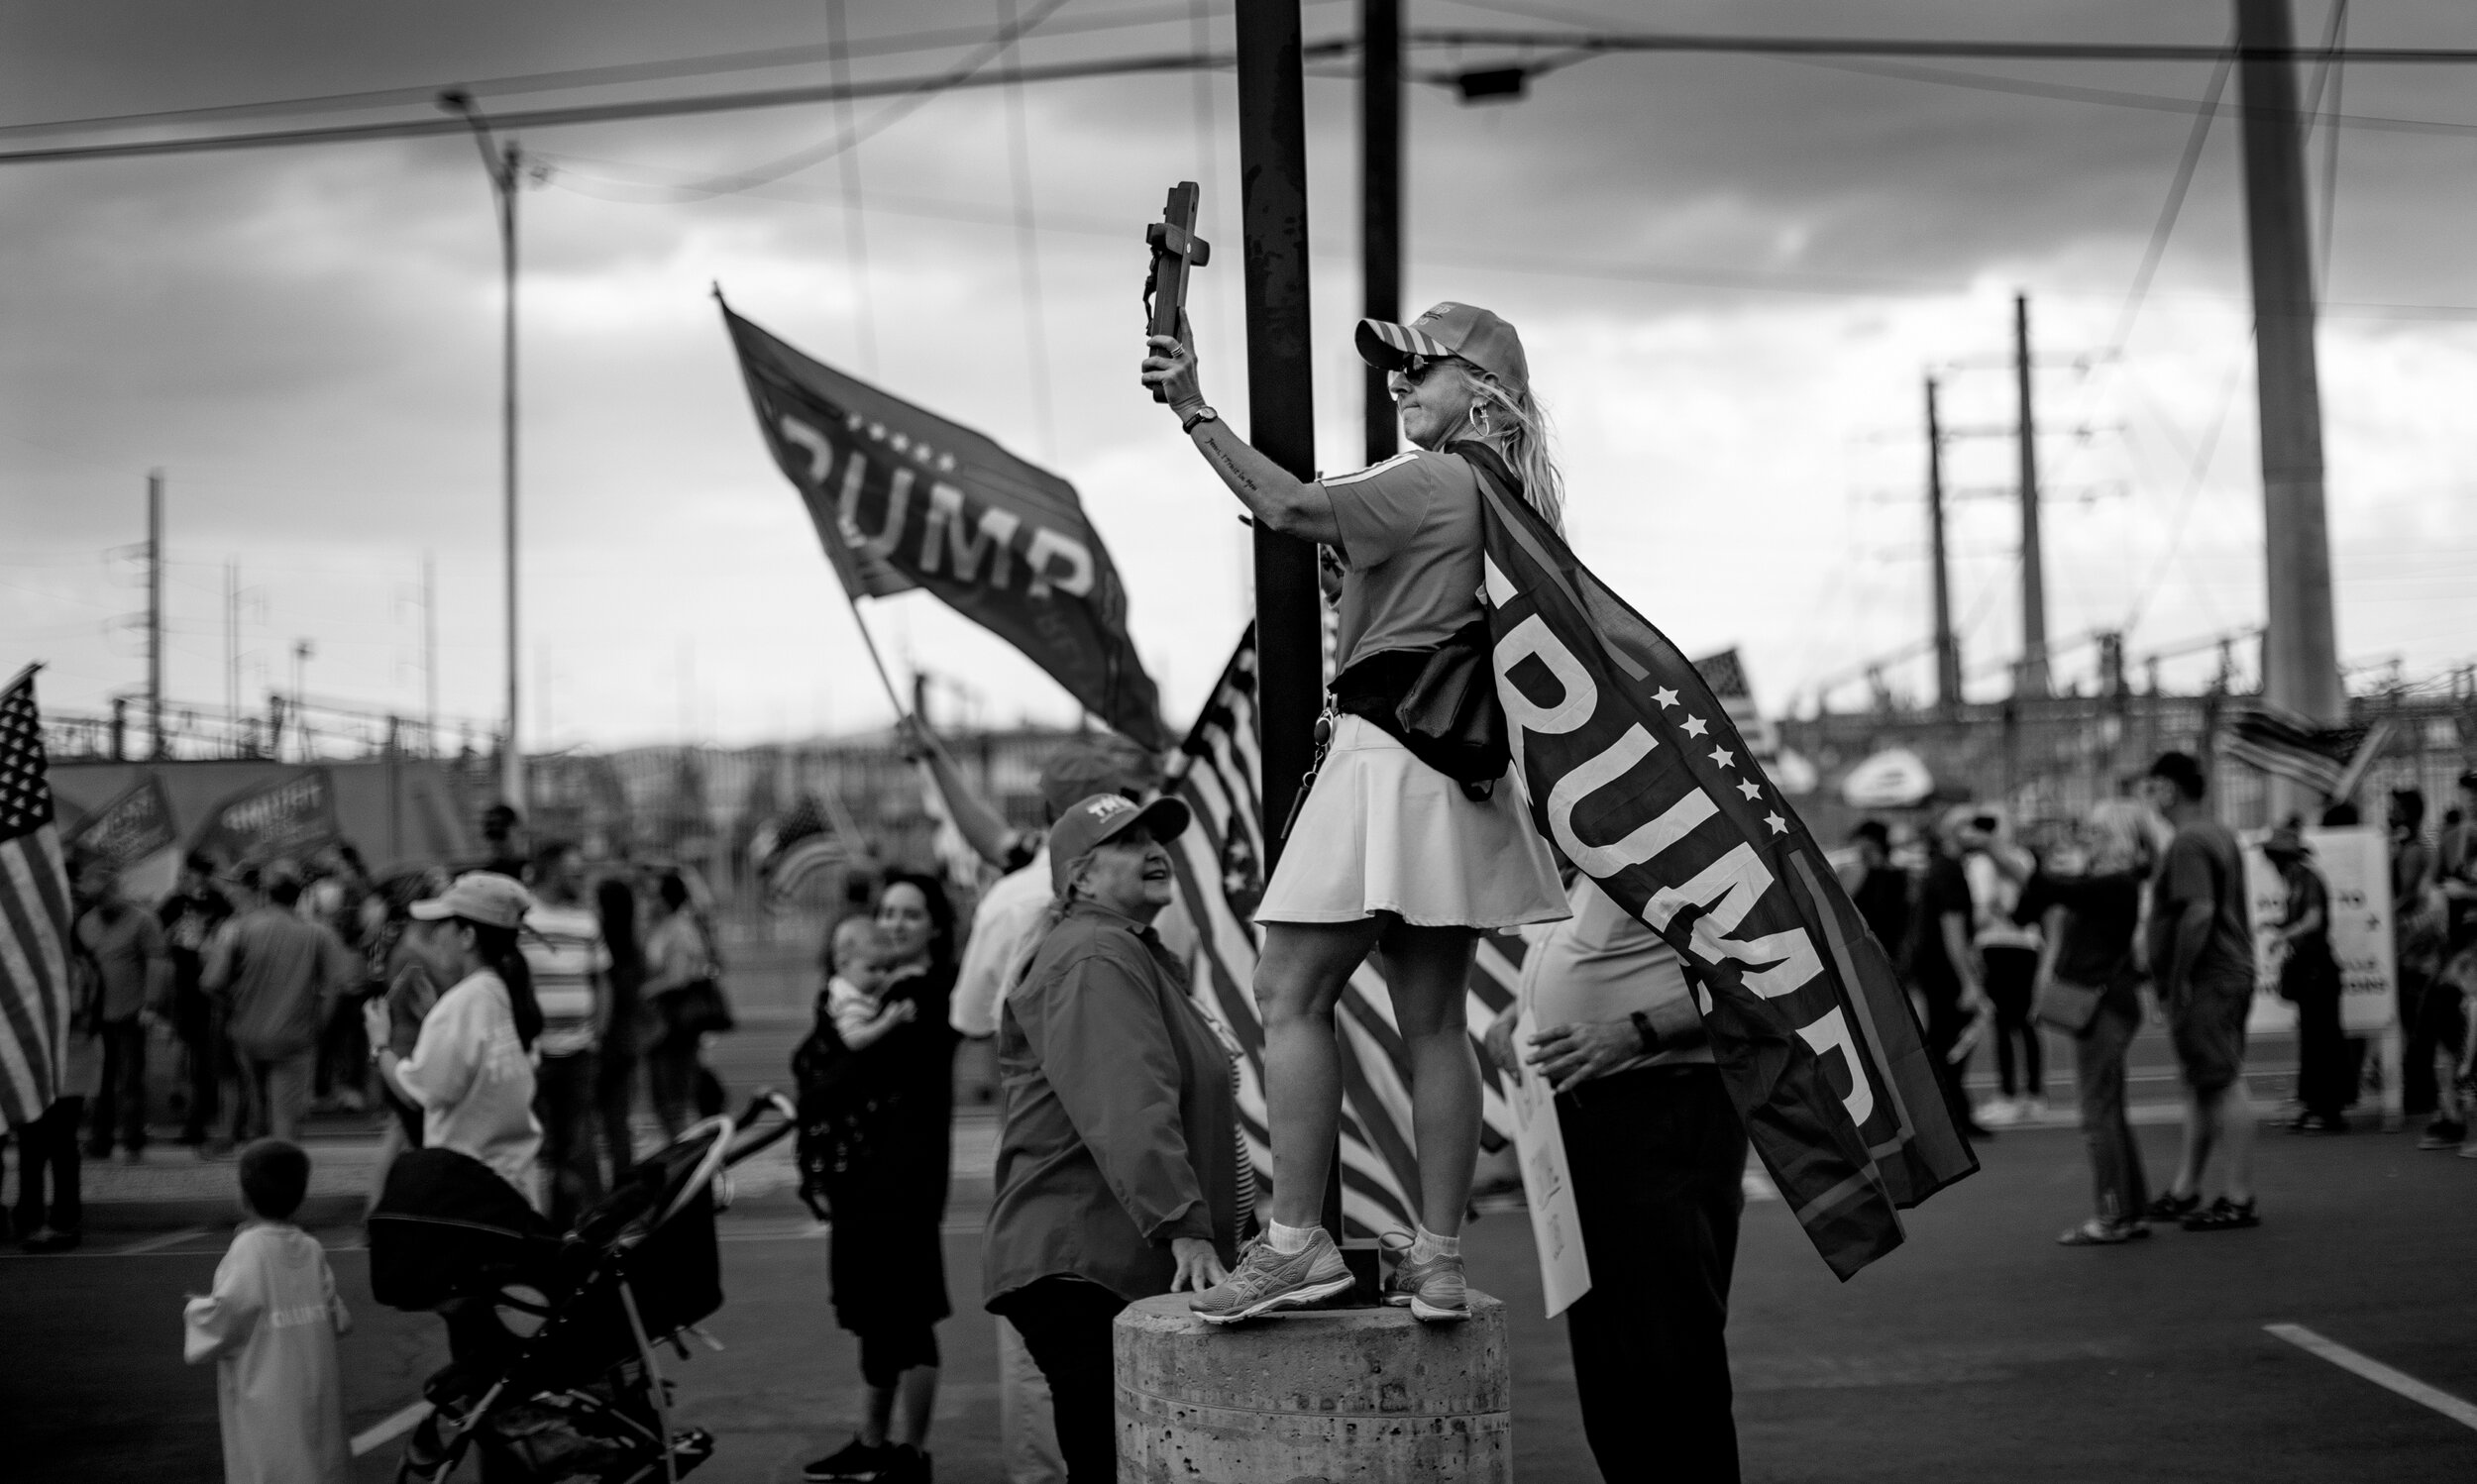  PHOENIX, AZ - NOVEMBER 7, 2020: As storm clouds move in,  a Trump supporter holds a cross up to the sky while attending a pro-Trump rally to defy the election results hours after  Biden was named President-elect  outside the Maricopa County election